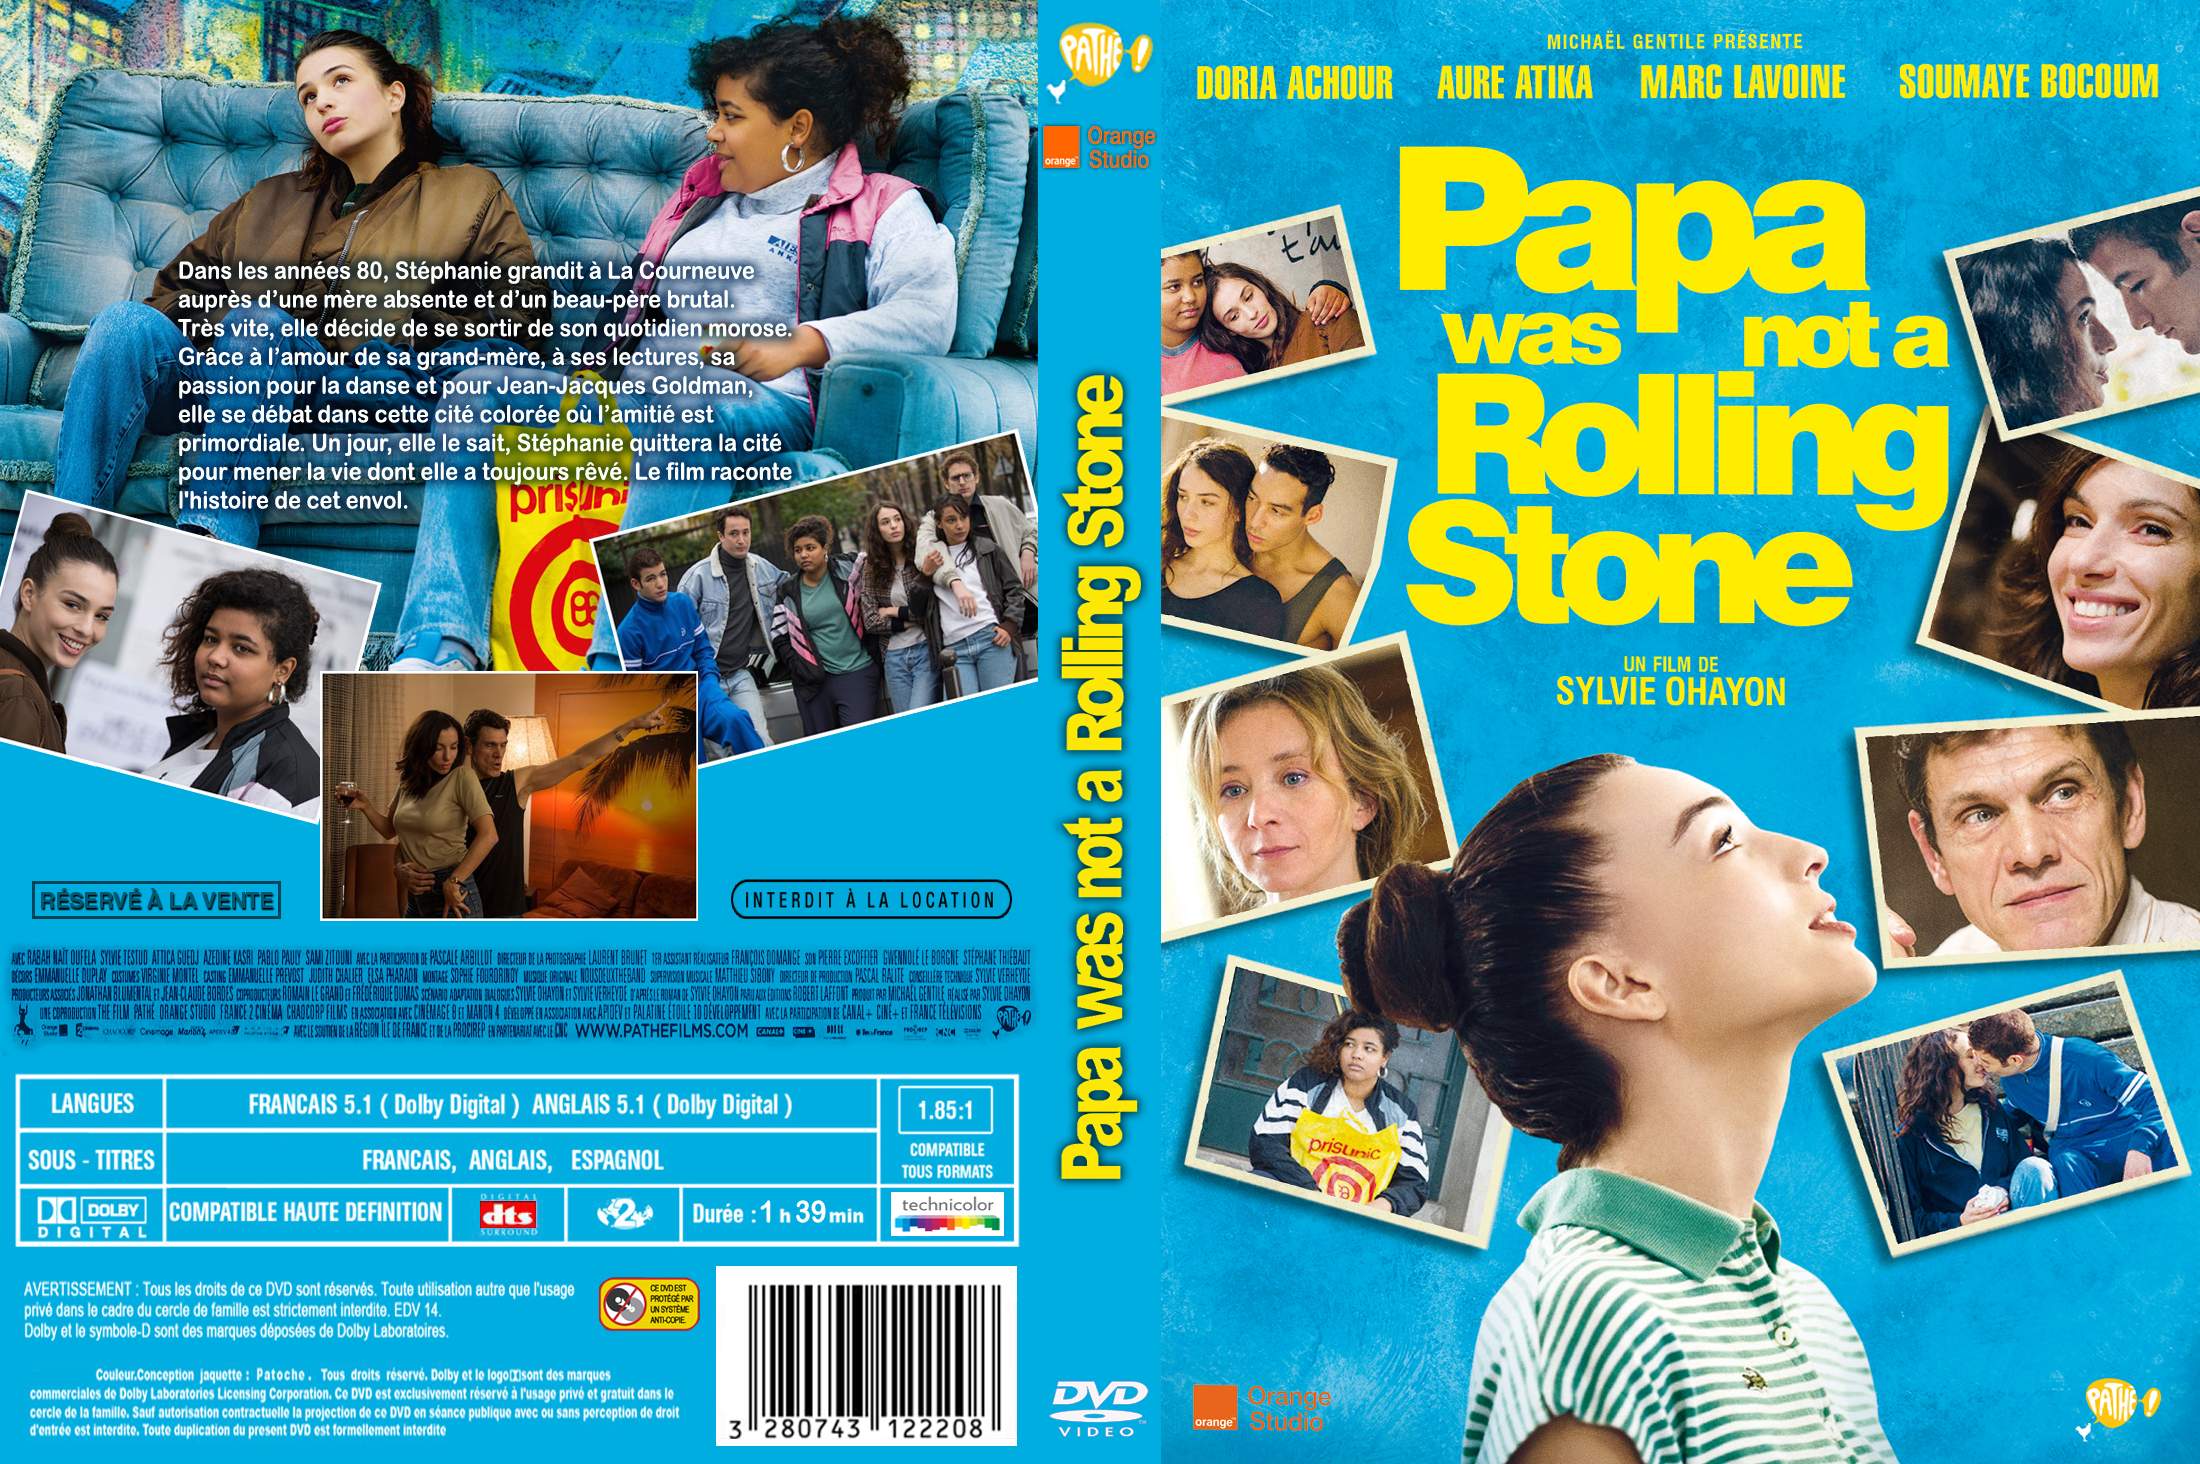 Jaquette DVD Papa was not a rolling stone custom